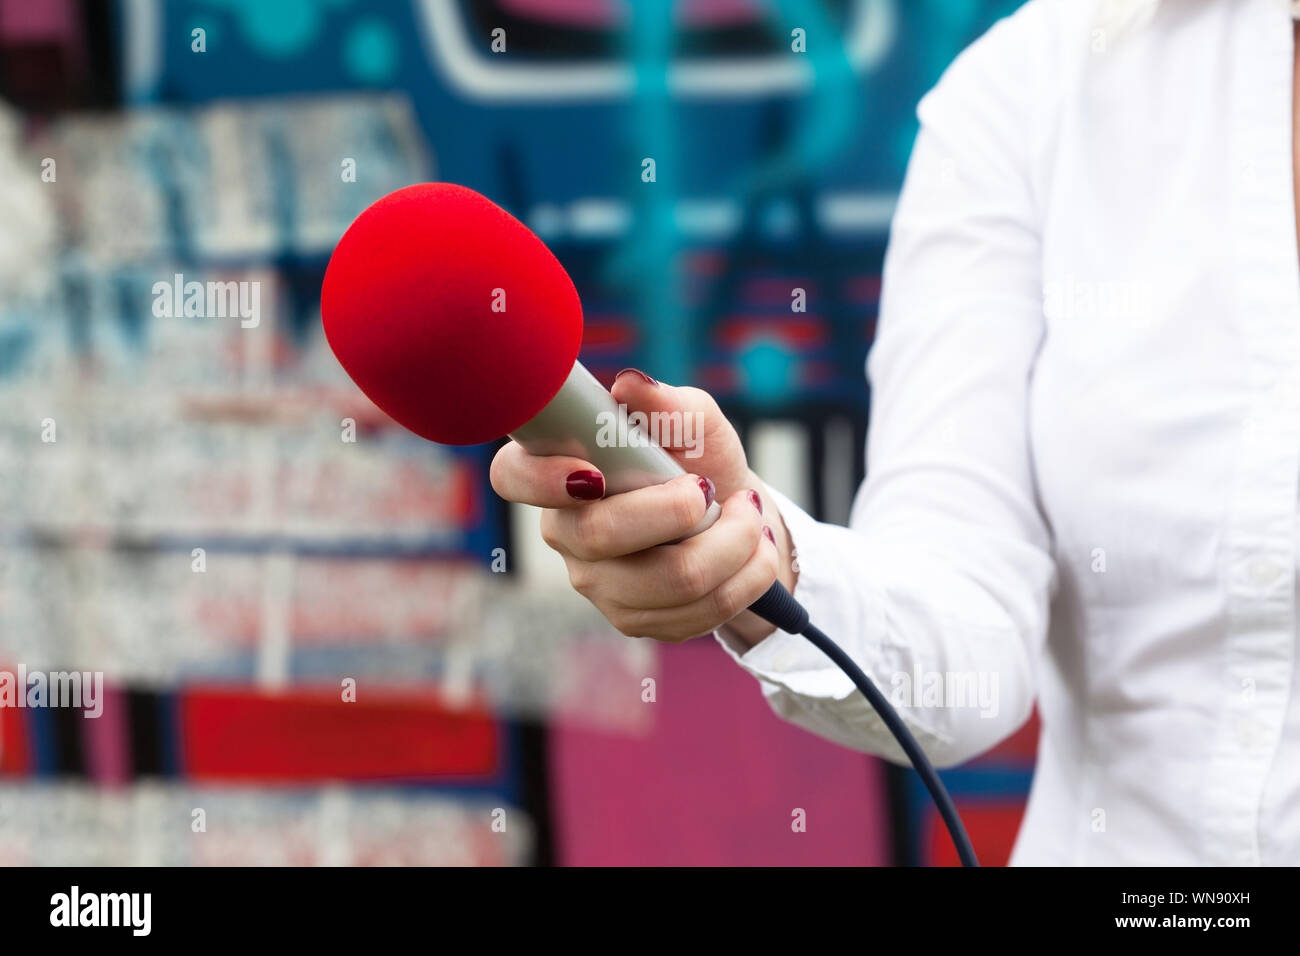 Journalist Holding Microphone For Conducting Interview Stock Photo